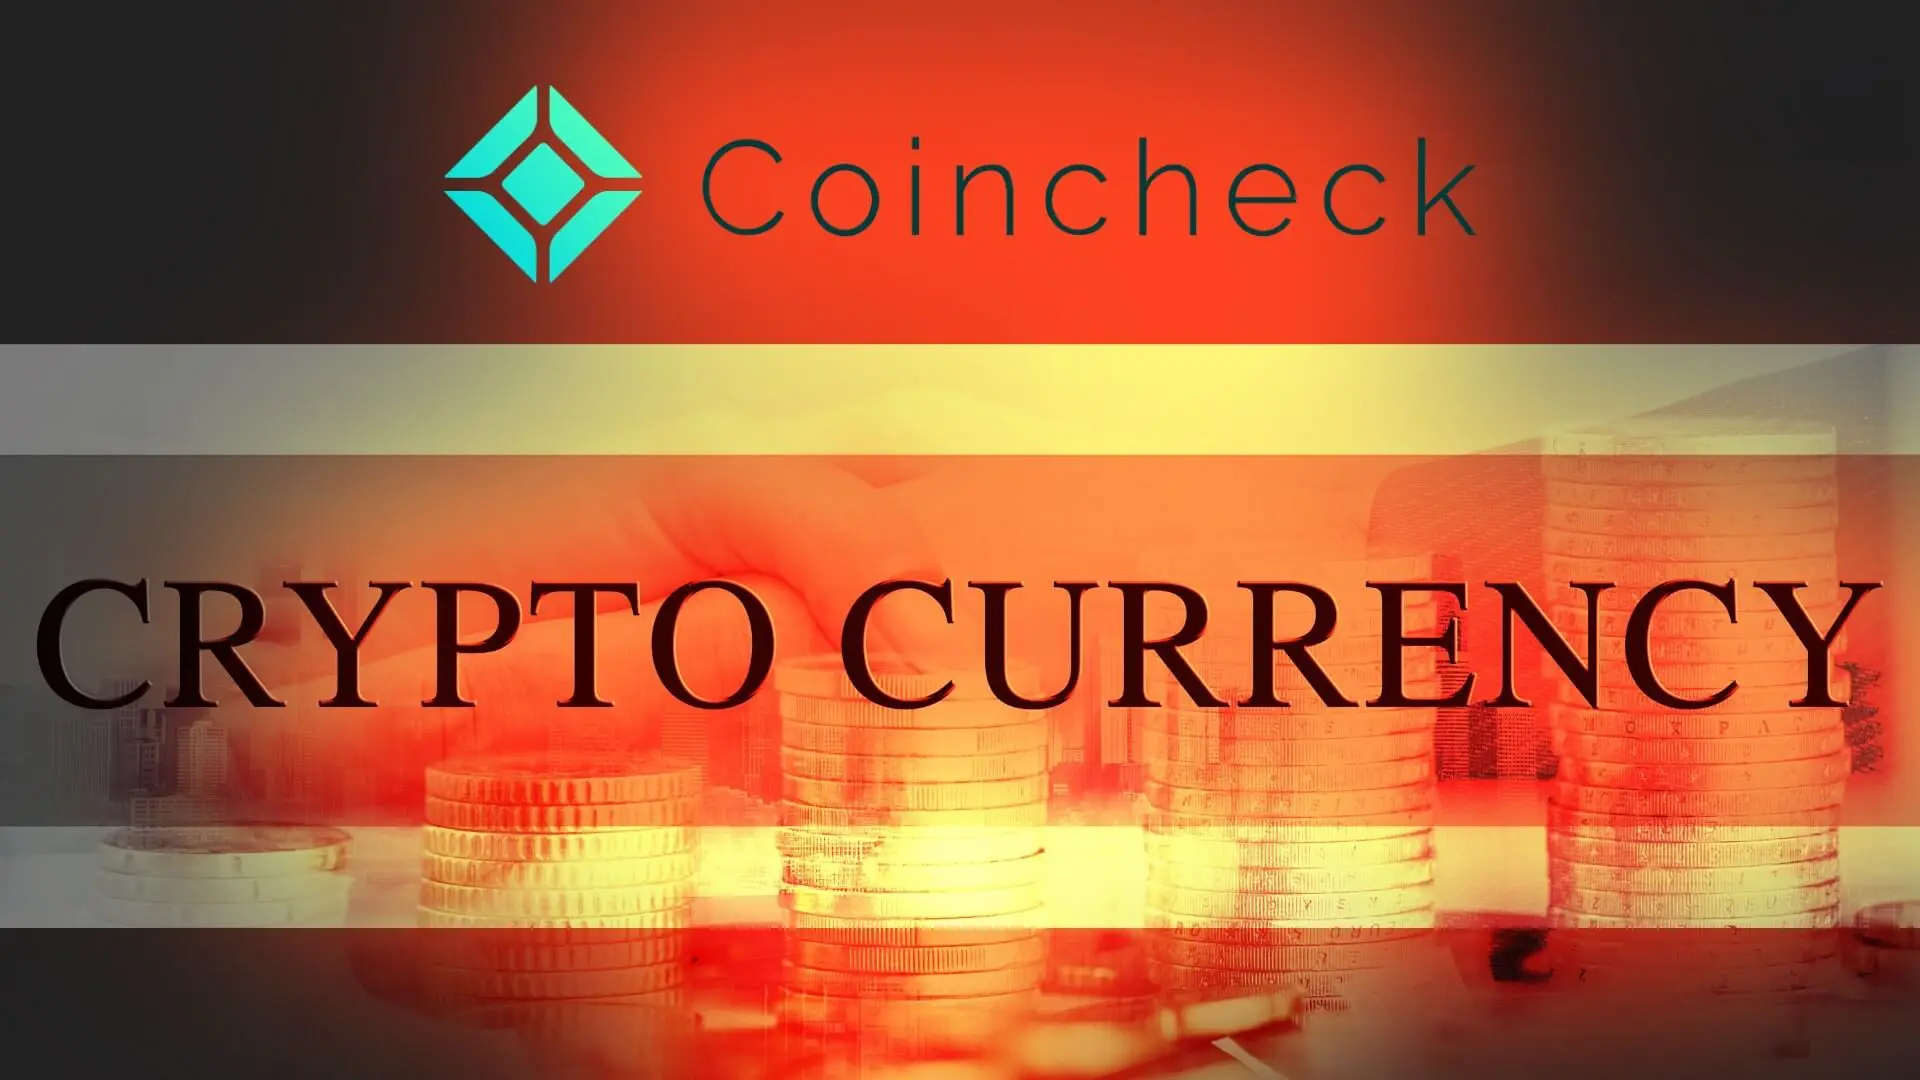 Cryptocurrency Exchange Coincheck to Halt Leveraged Trading From March 13, 2020